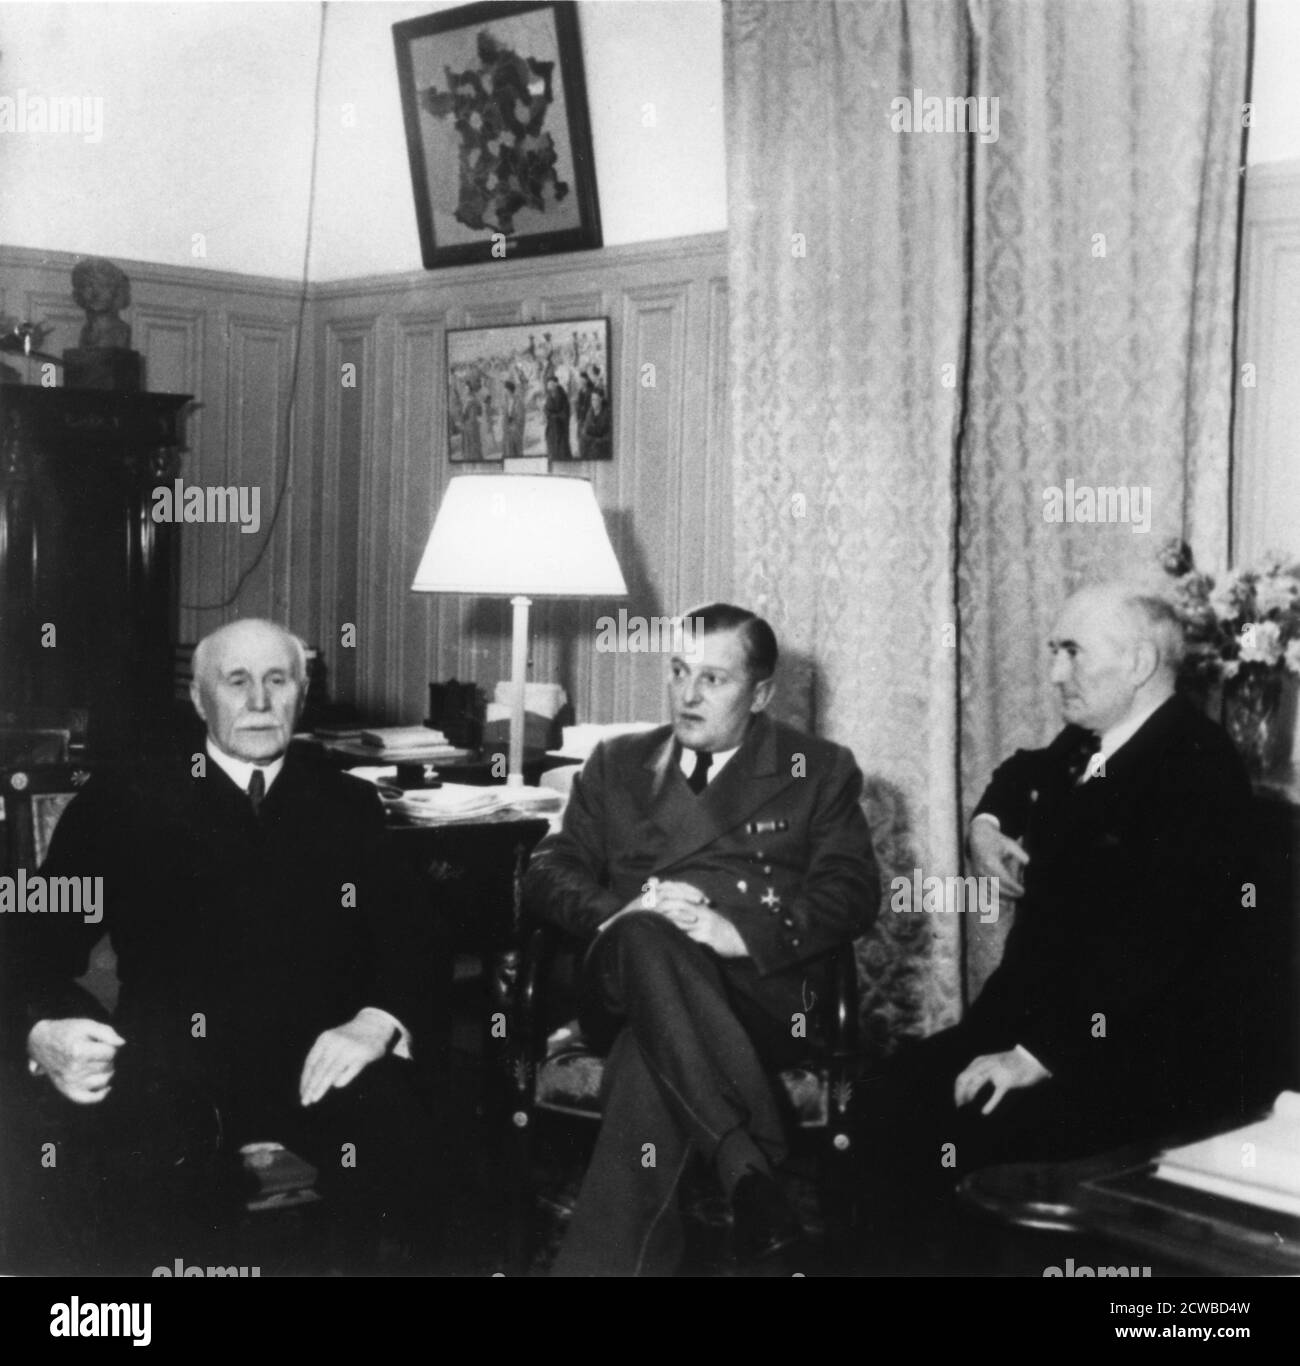 Leaders of Vichy France, c1940-1942. Marshal Philippe Petain (left), Head of State of the Vichy regime established after the defeat of France in June 1940, with Admiral Francois Darlan (right), his deputy from February 1941 until November 1942. The two and the third, unidentified, man are meeting after having received the German ambassador, Otto Abetz. The photographer is unknown. Stock Photo